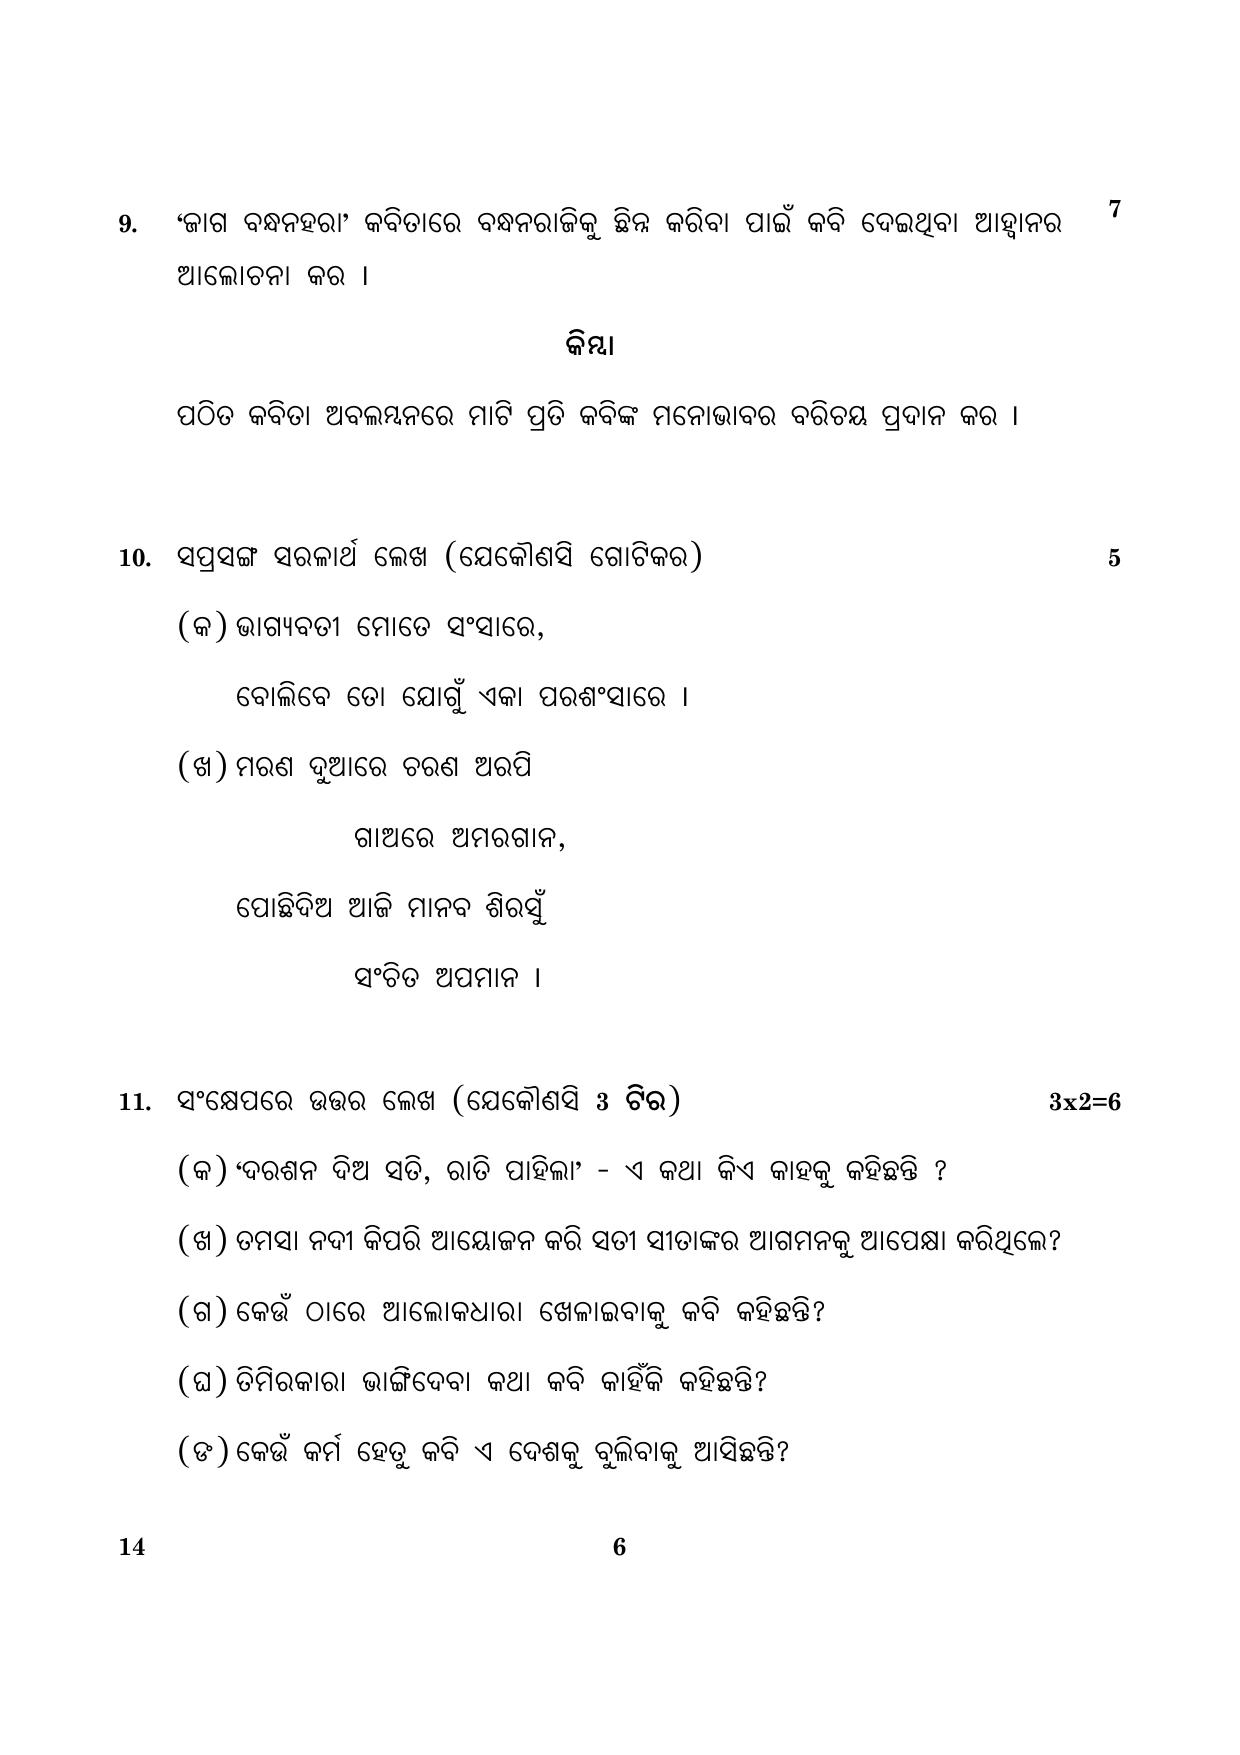 CBSE Class 10 014 Odia 2016 Question Paper - Page 6